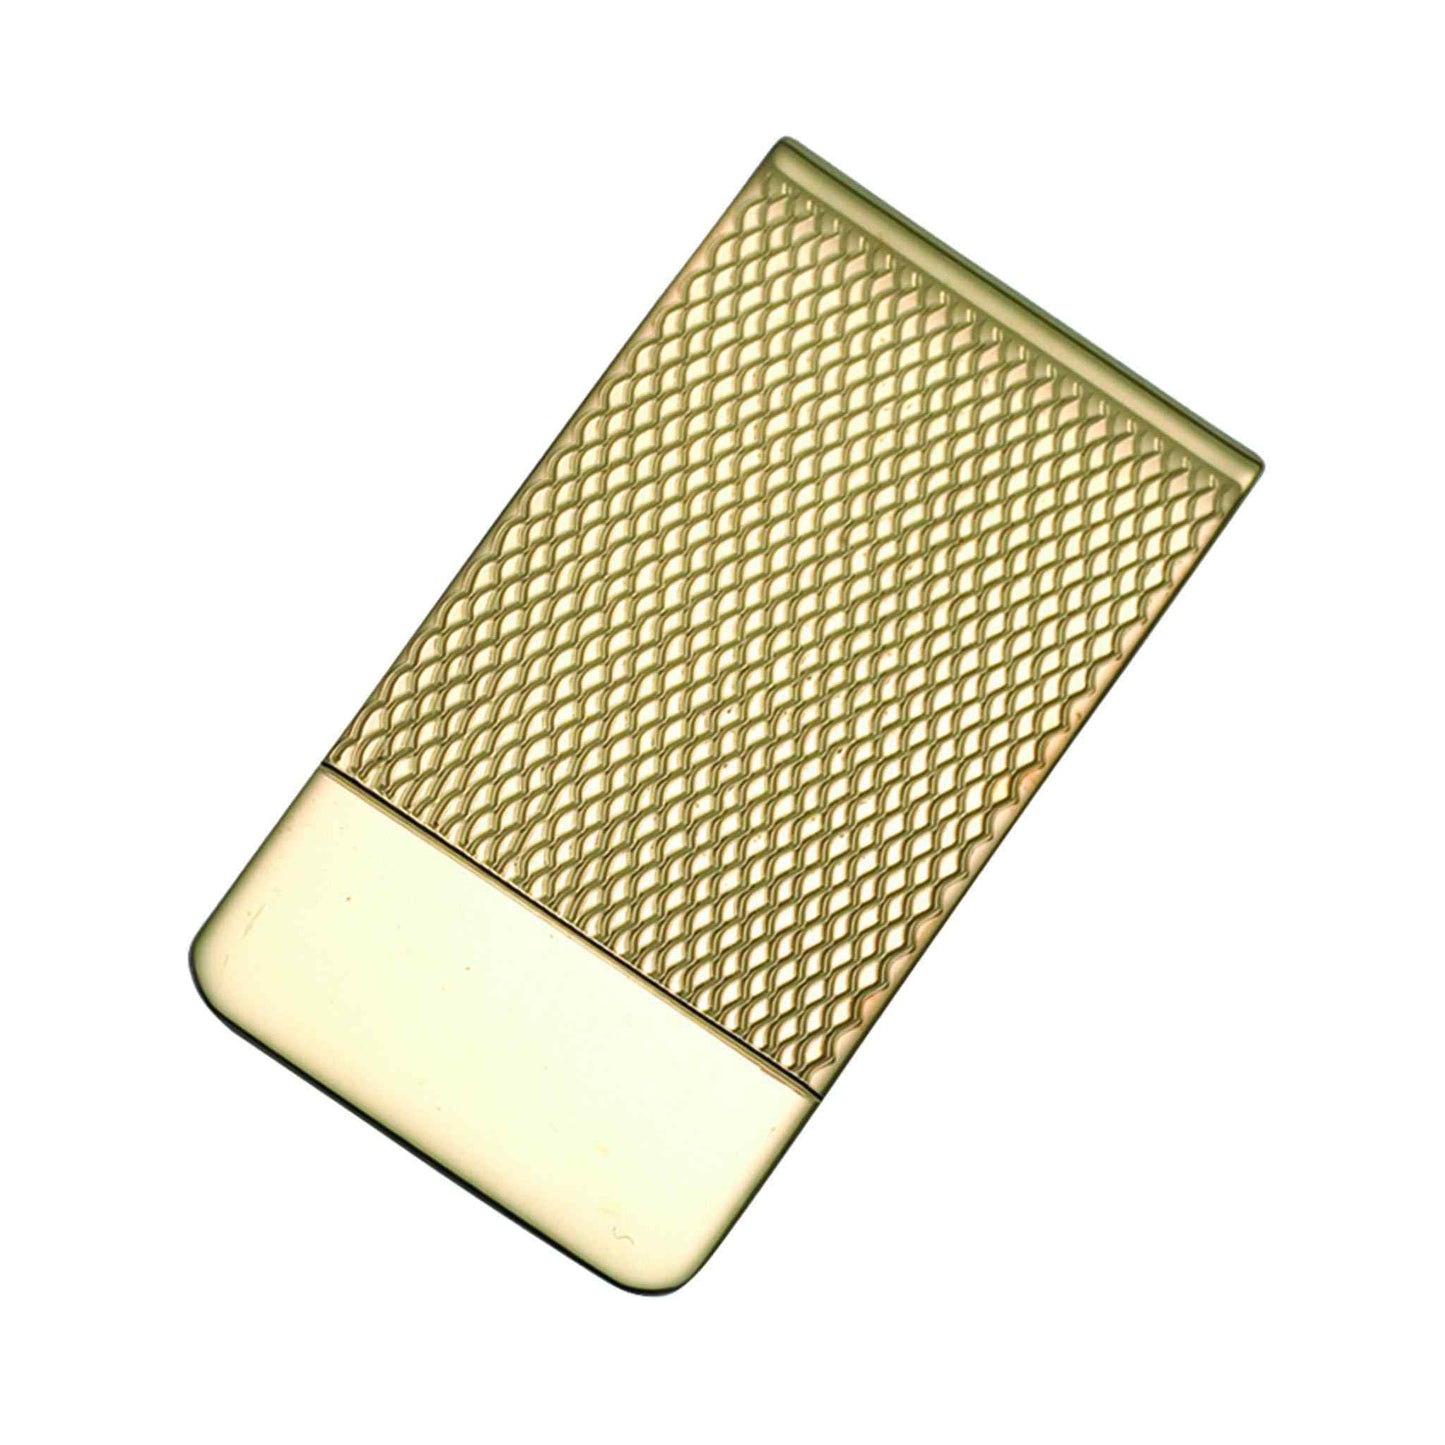 A 14k yellow gold 1" money clip with etched end signet displayed on a neutral white background.